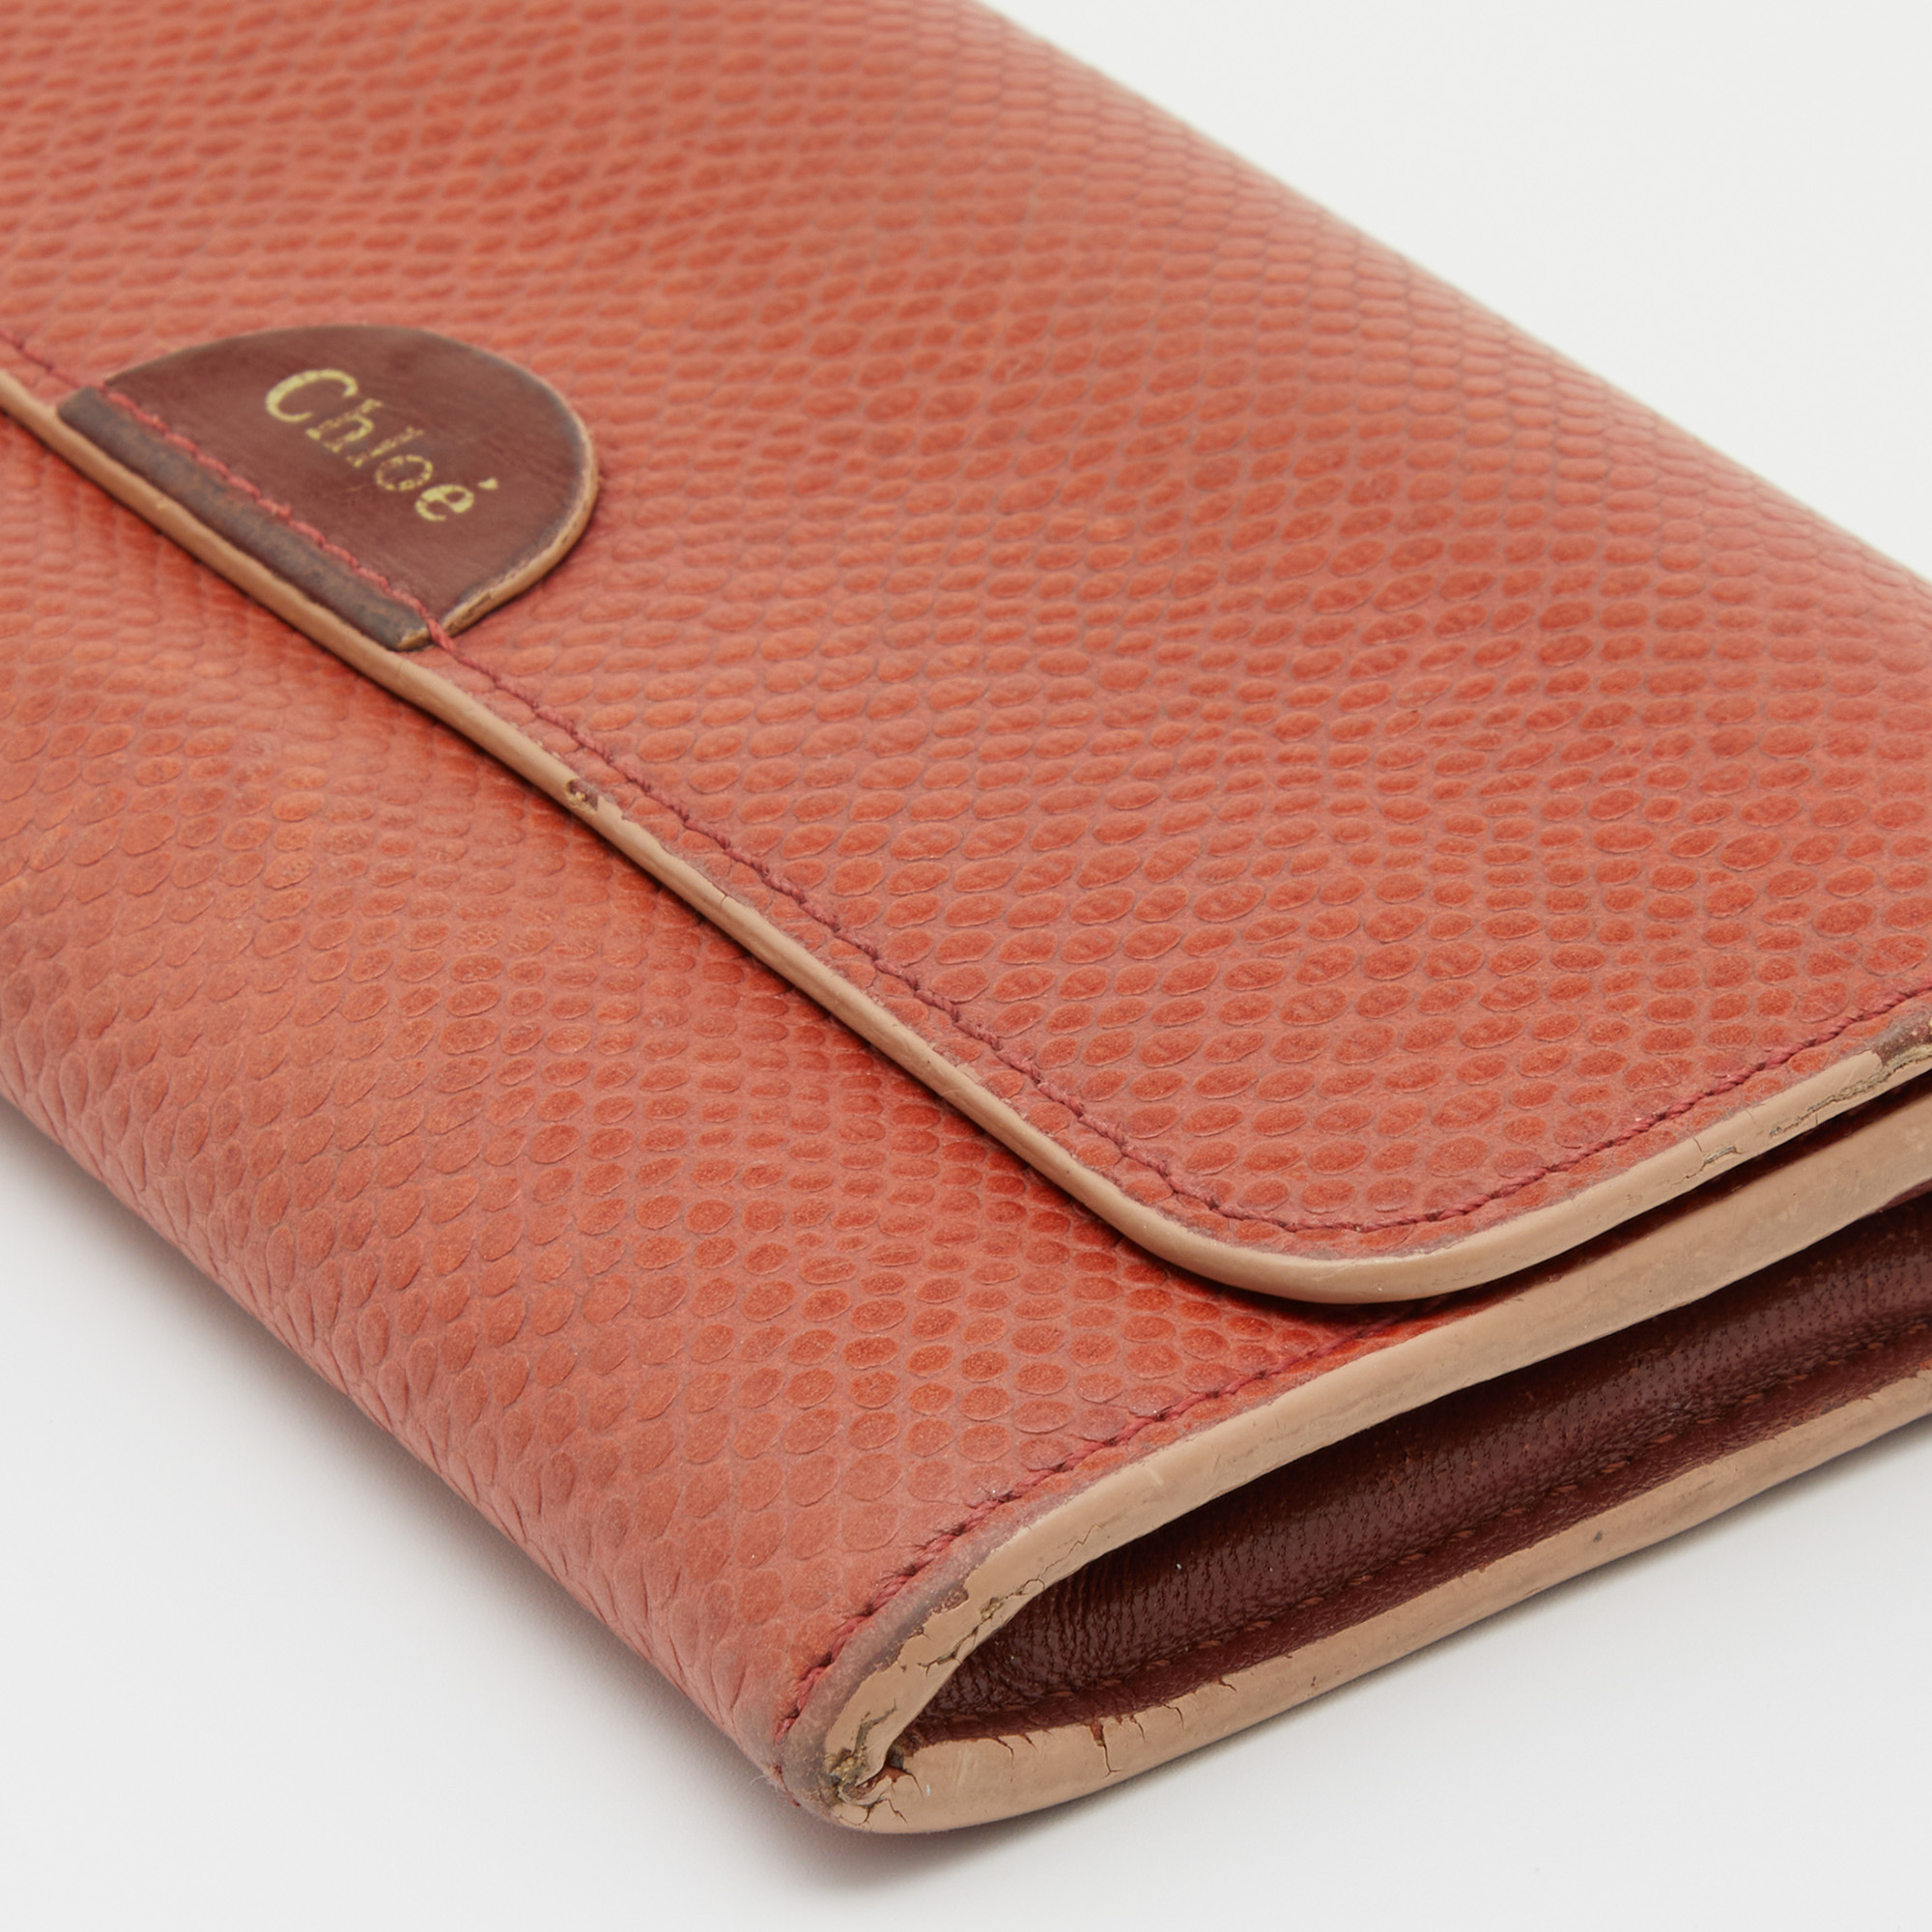 Chloe Rust Leather Flap Continental Wallet